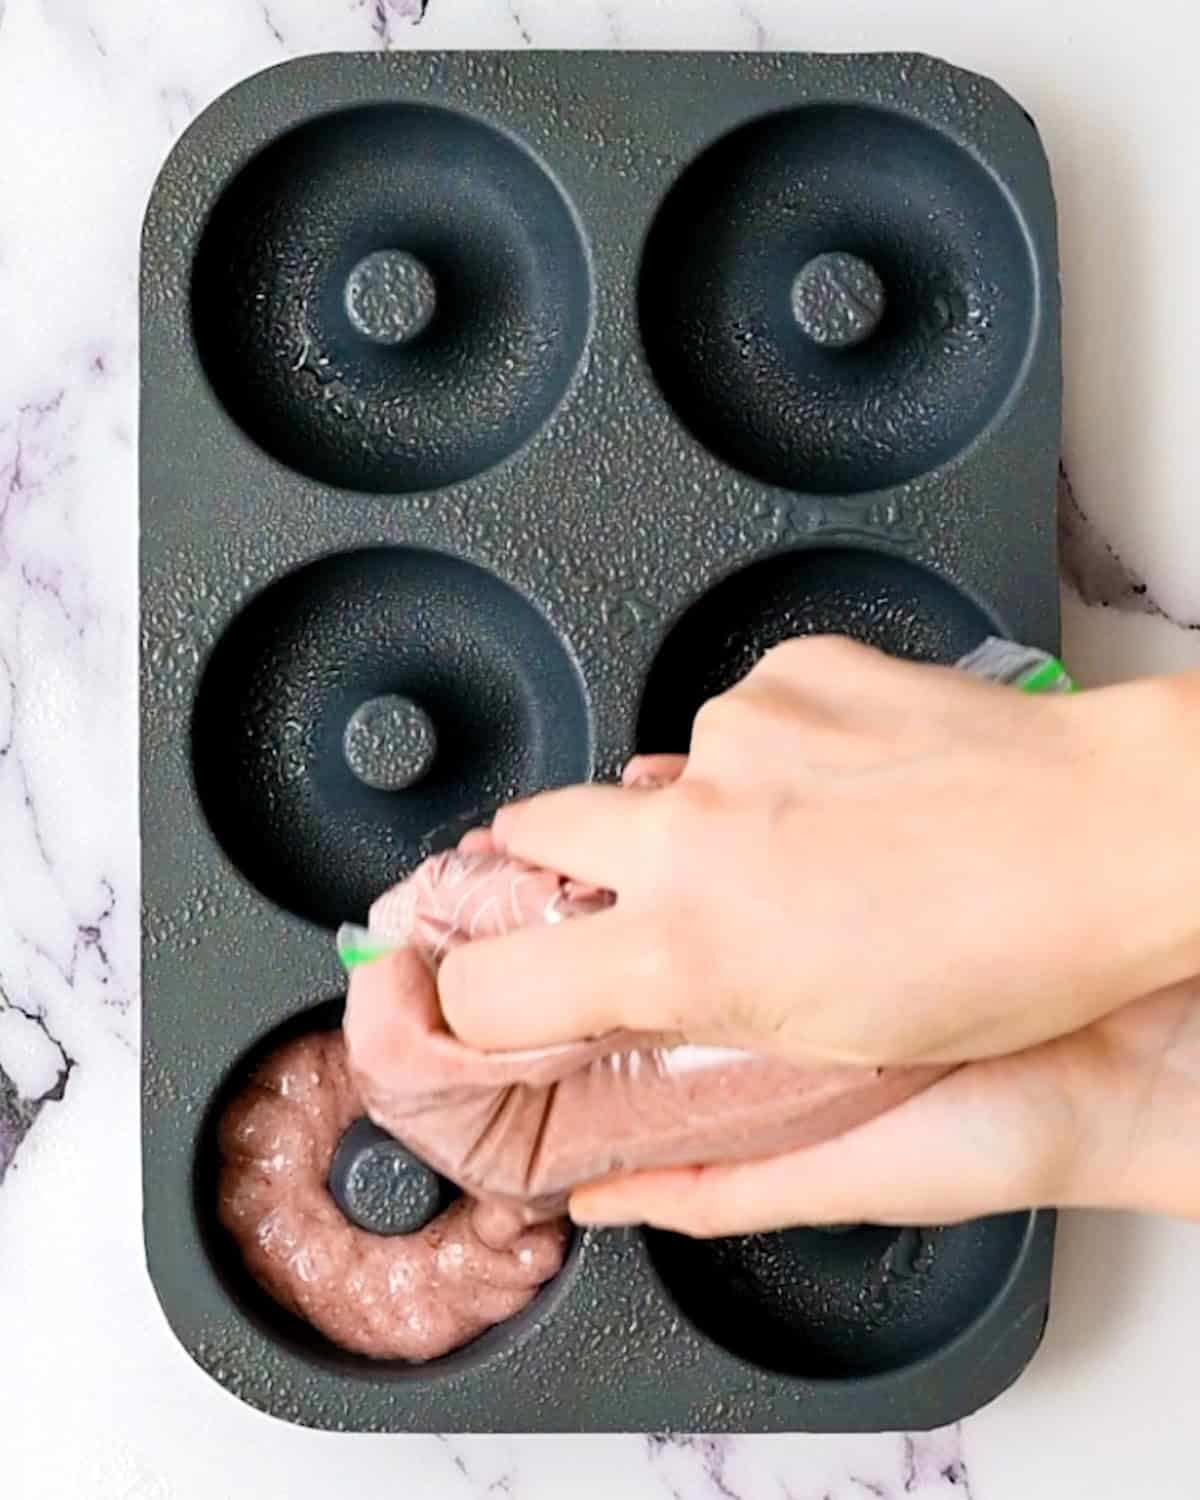 piping Baked Raspberry Donuts batter into a donut pan